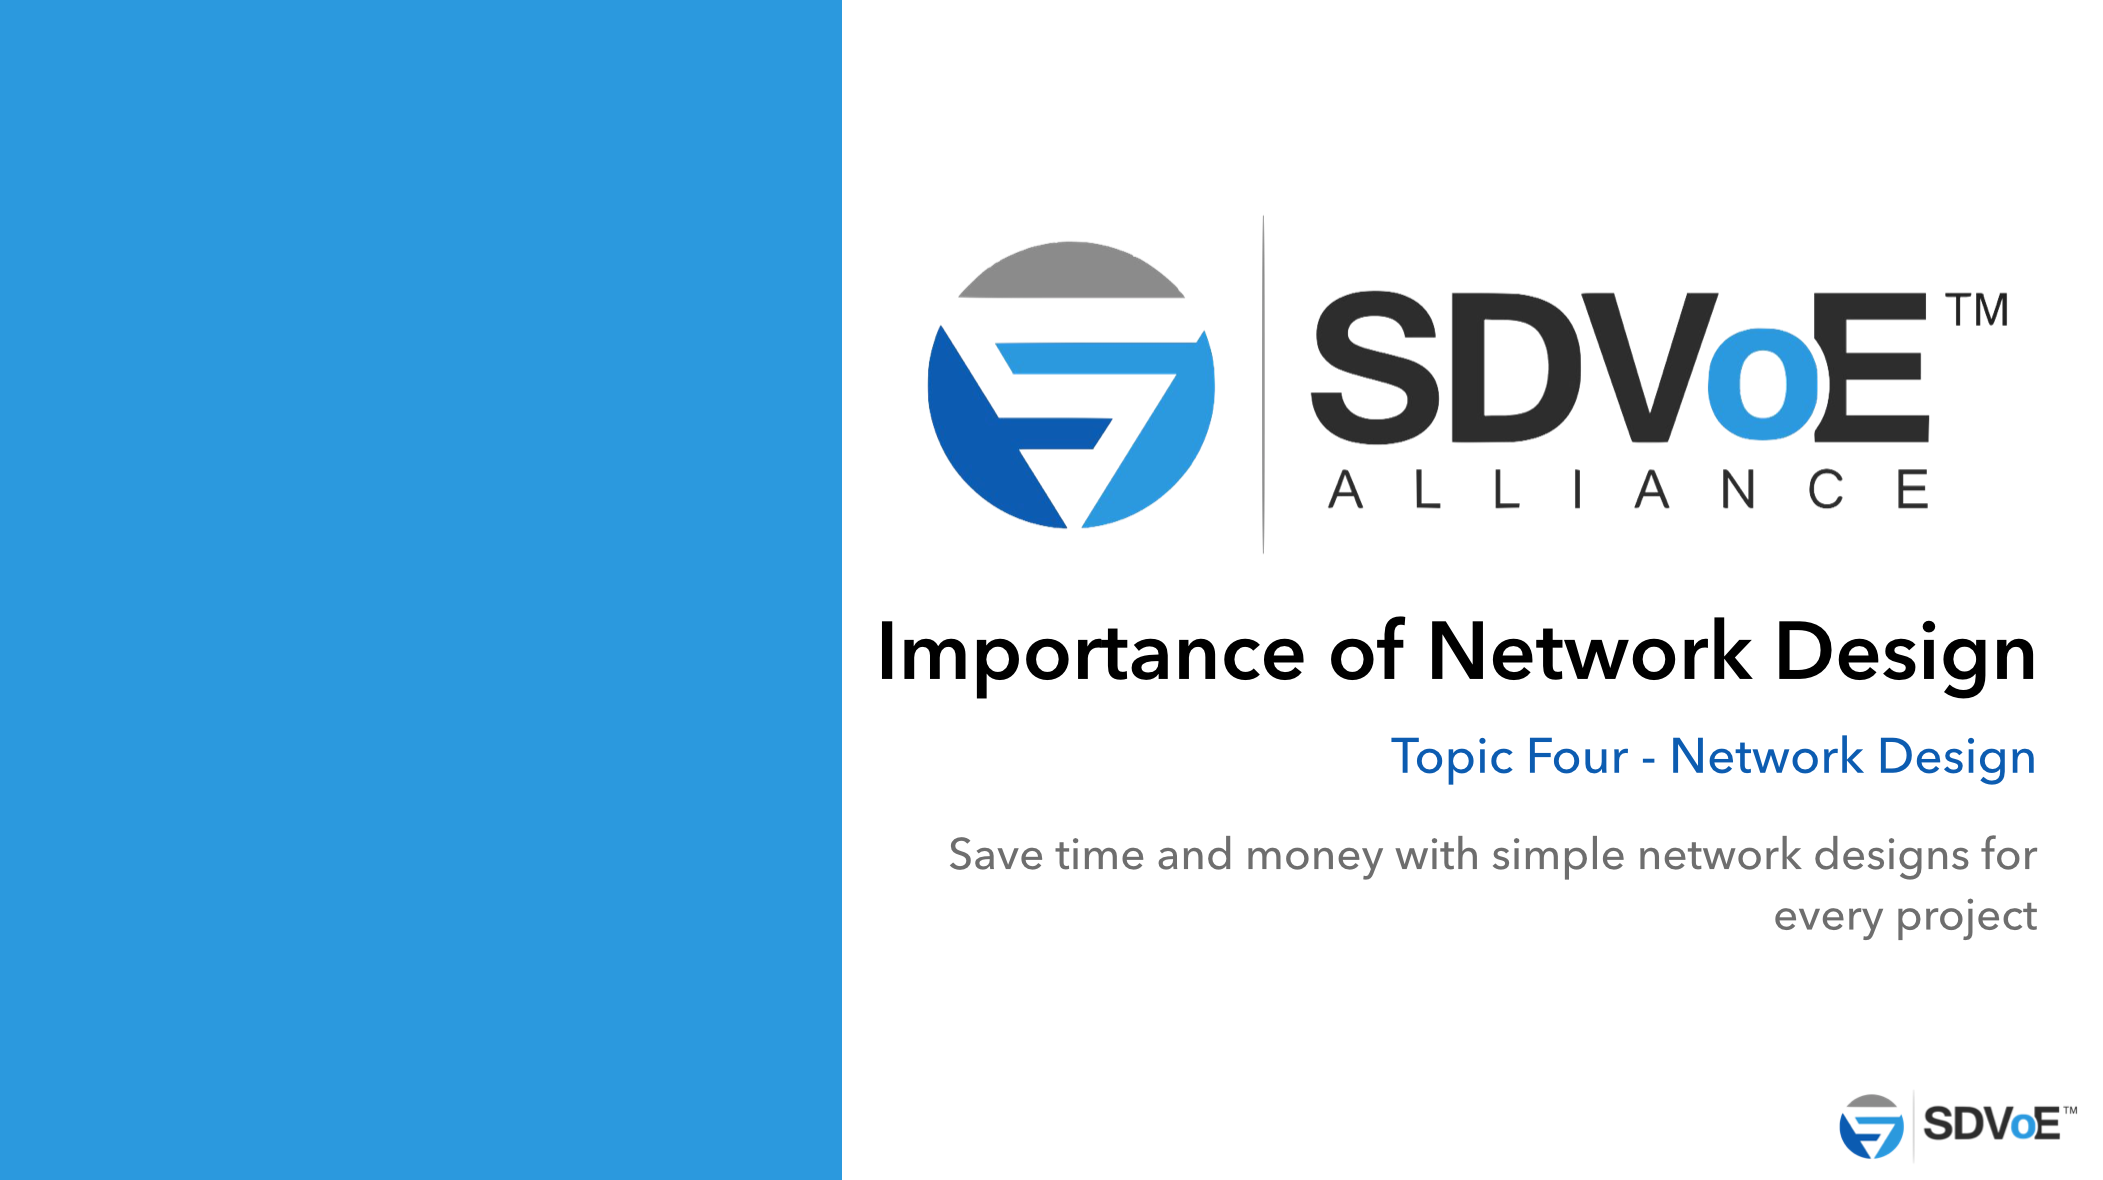 Topic four - The importance of network design